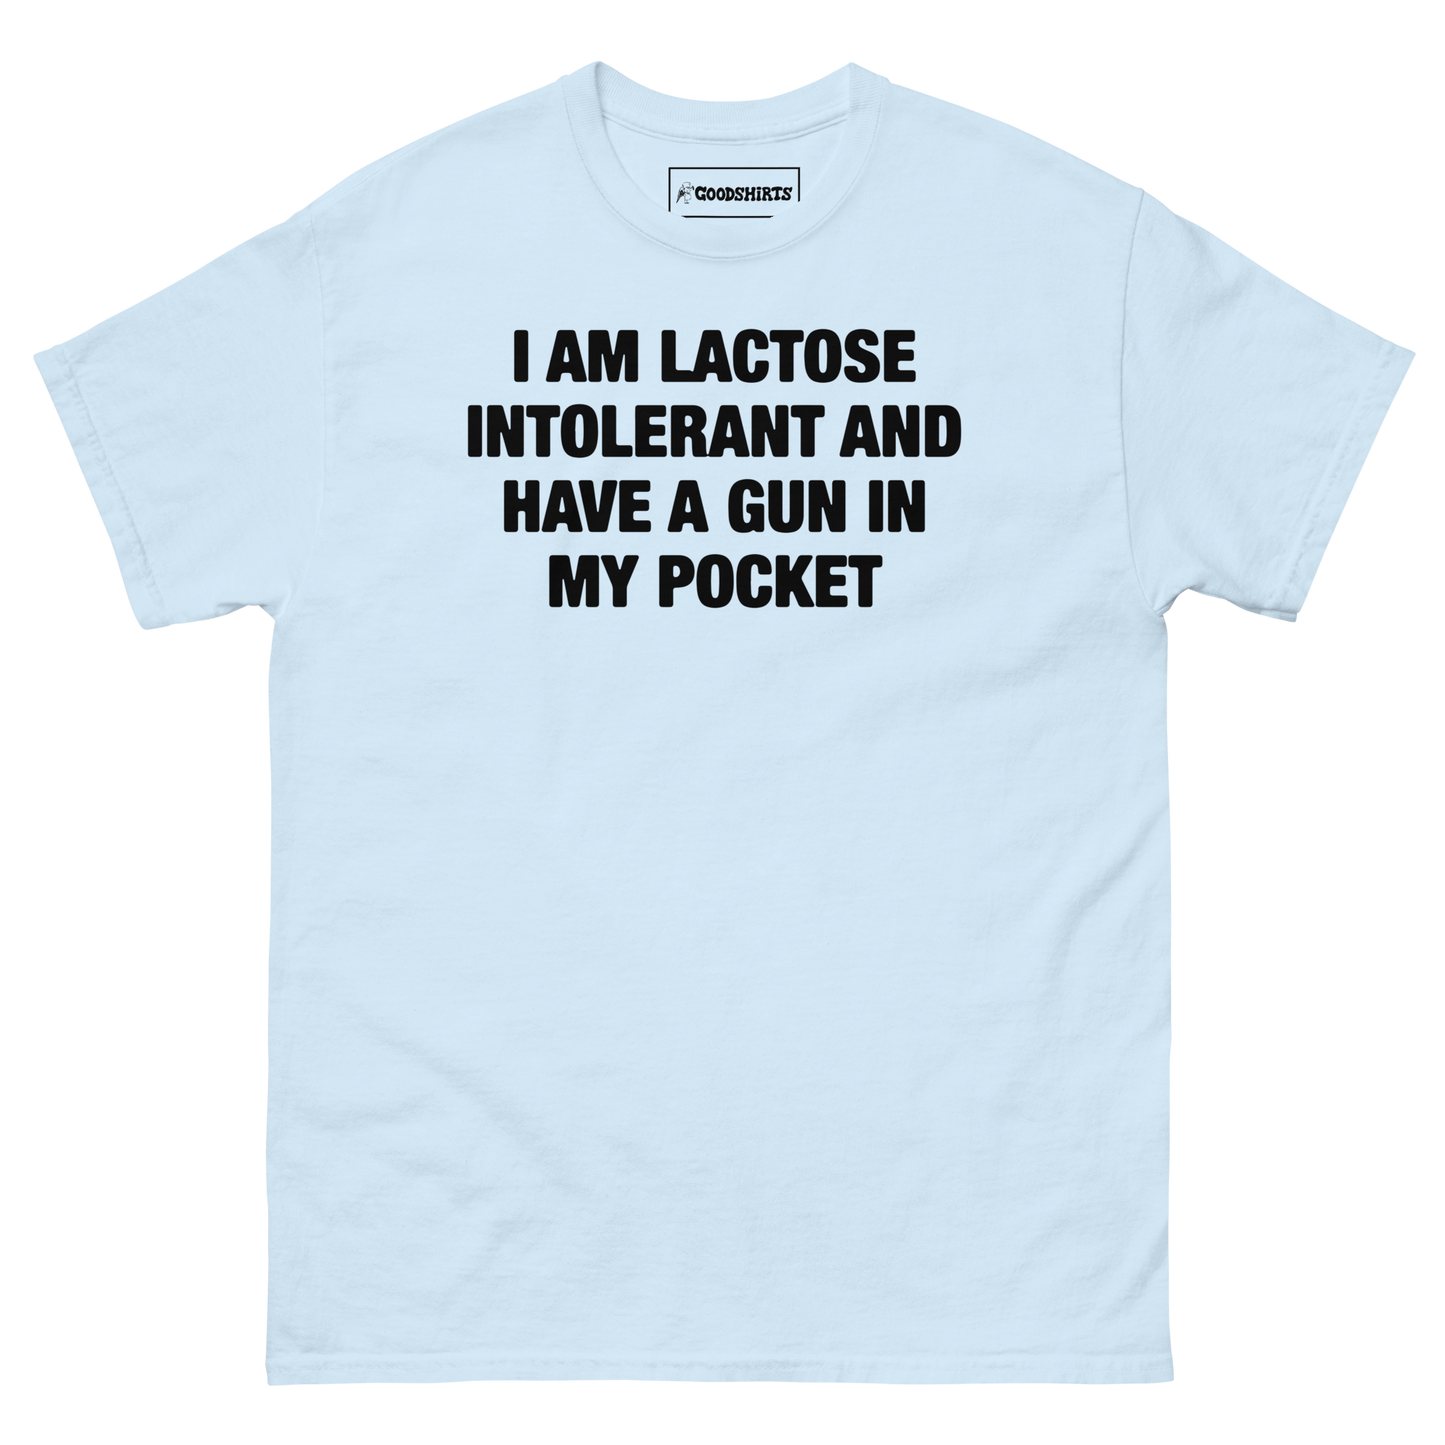 I Am Lactose Intolerant And Have A Gun In My Pocket.